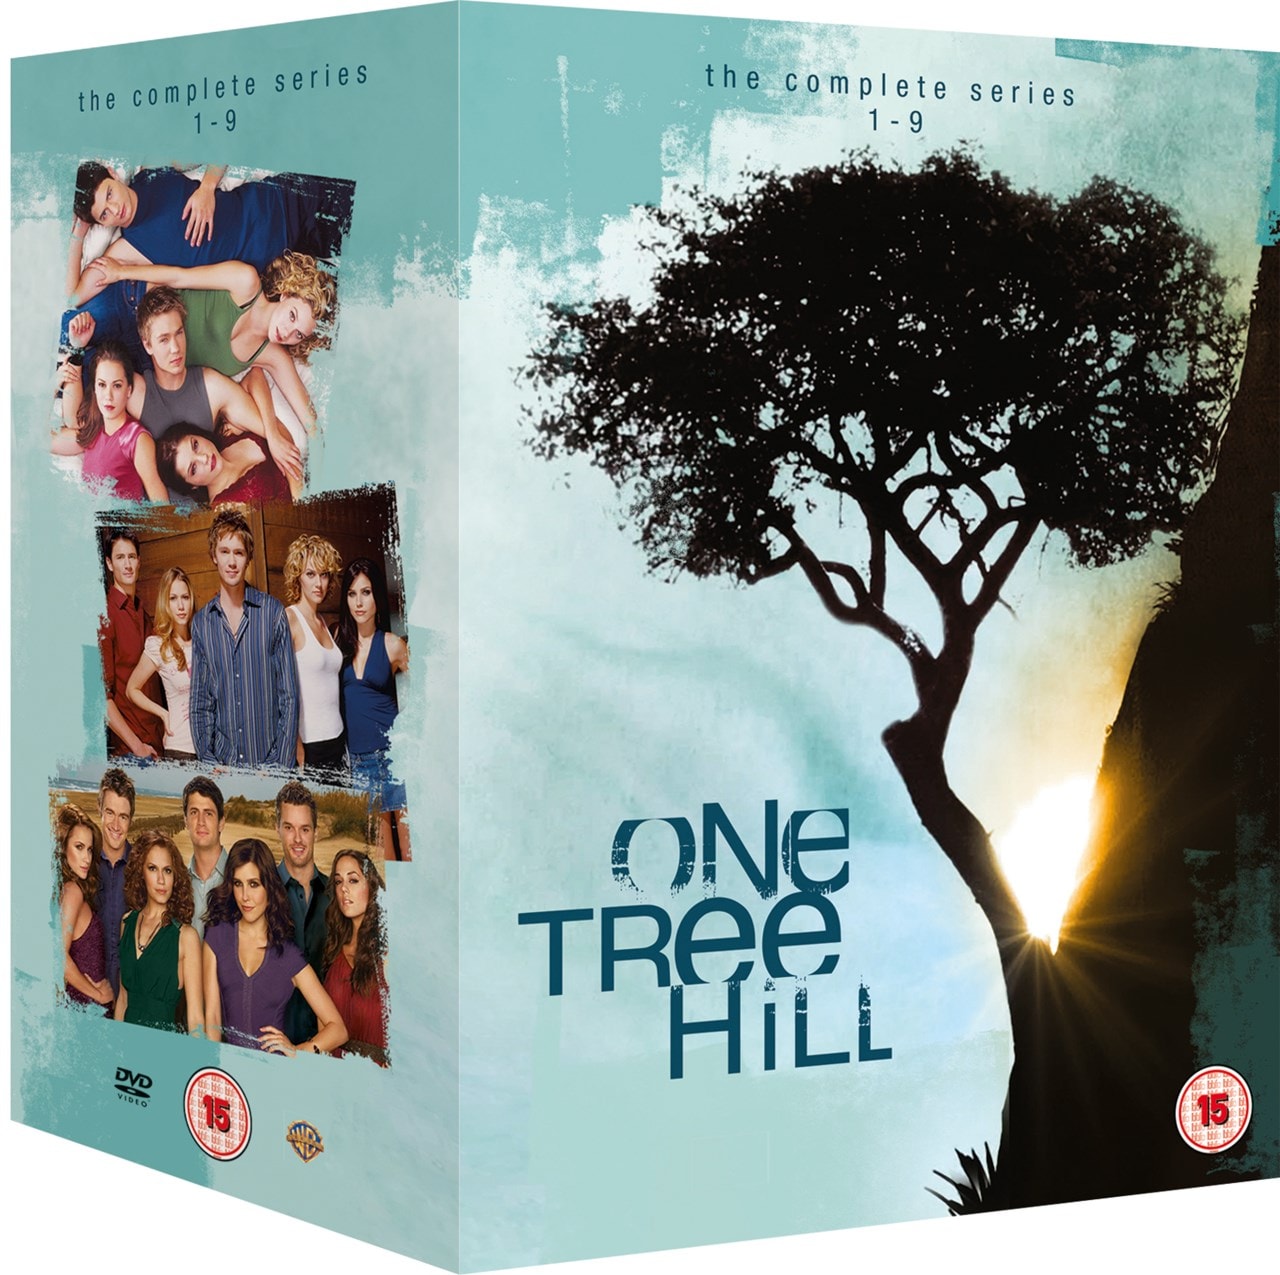 One Tree Hill The Complete Series 1 9 Dvd Box Set Free Shipping Over Hmv Store